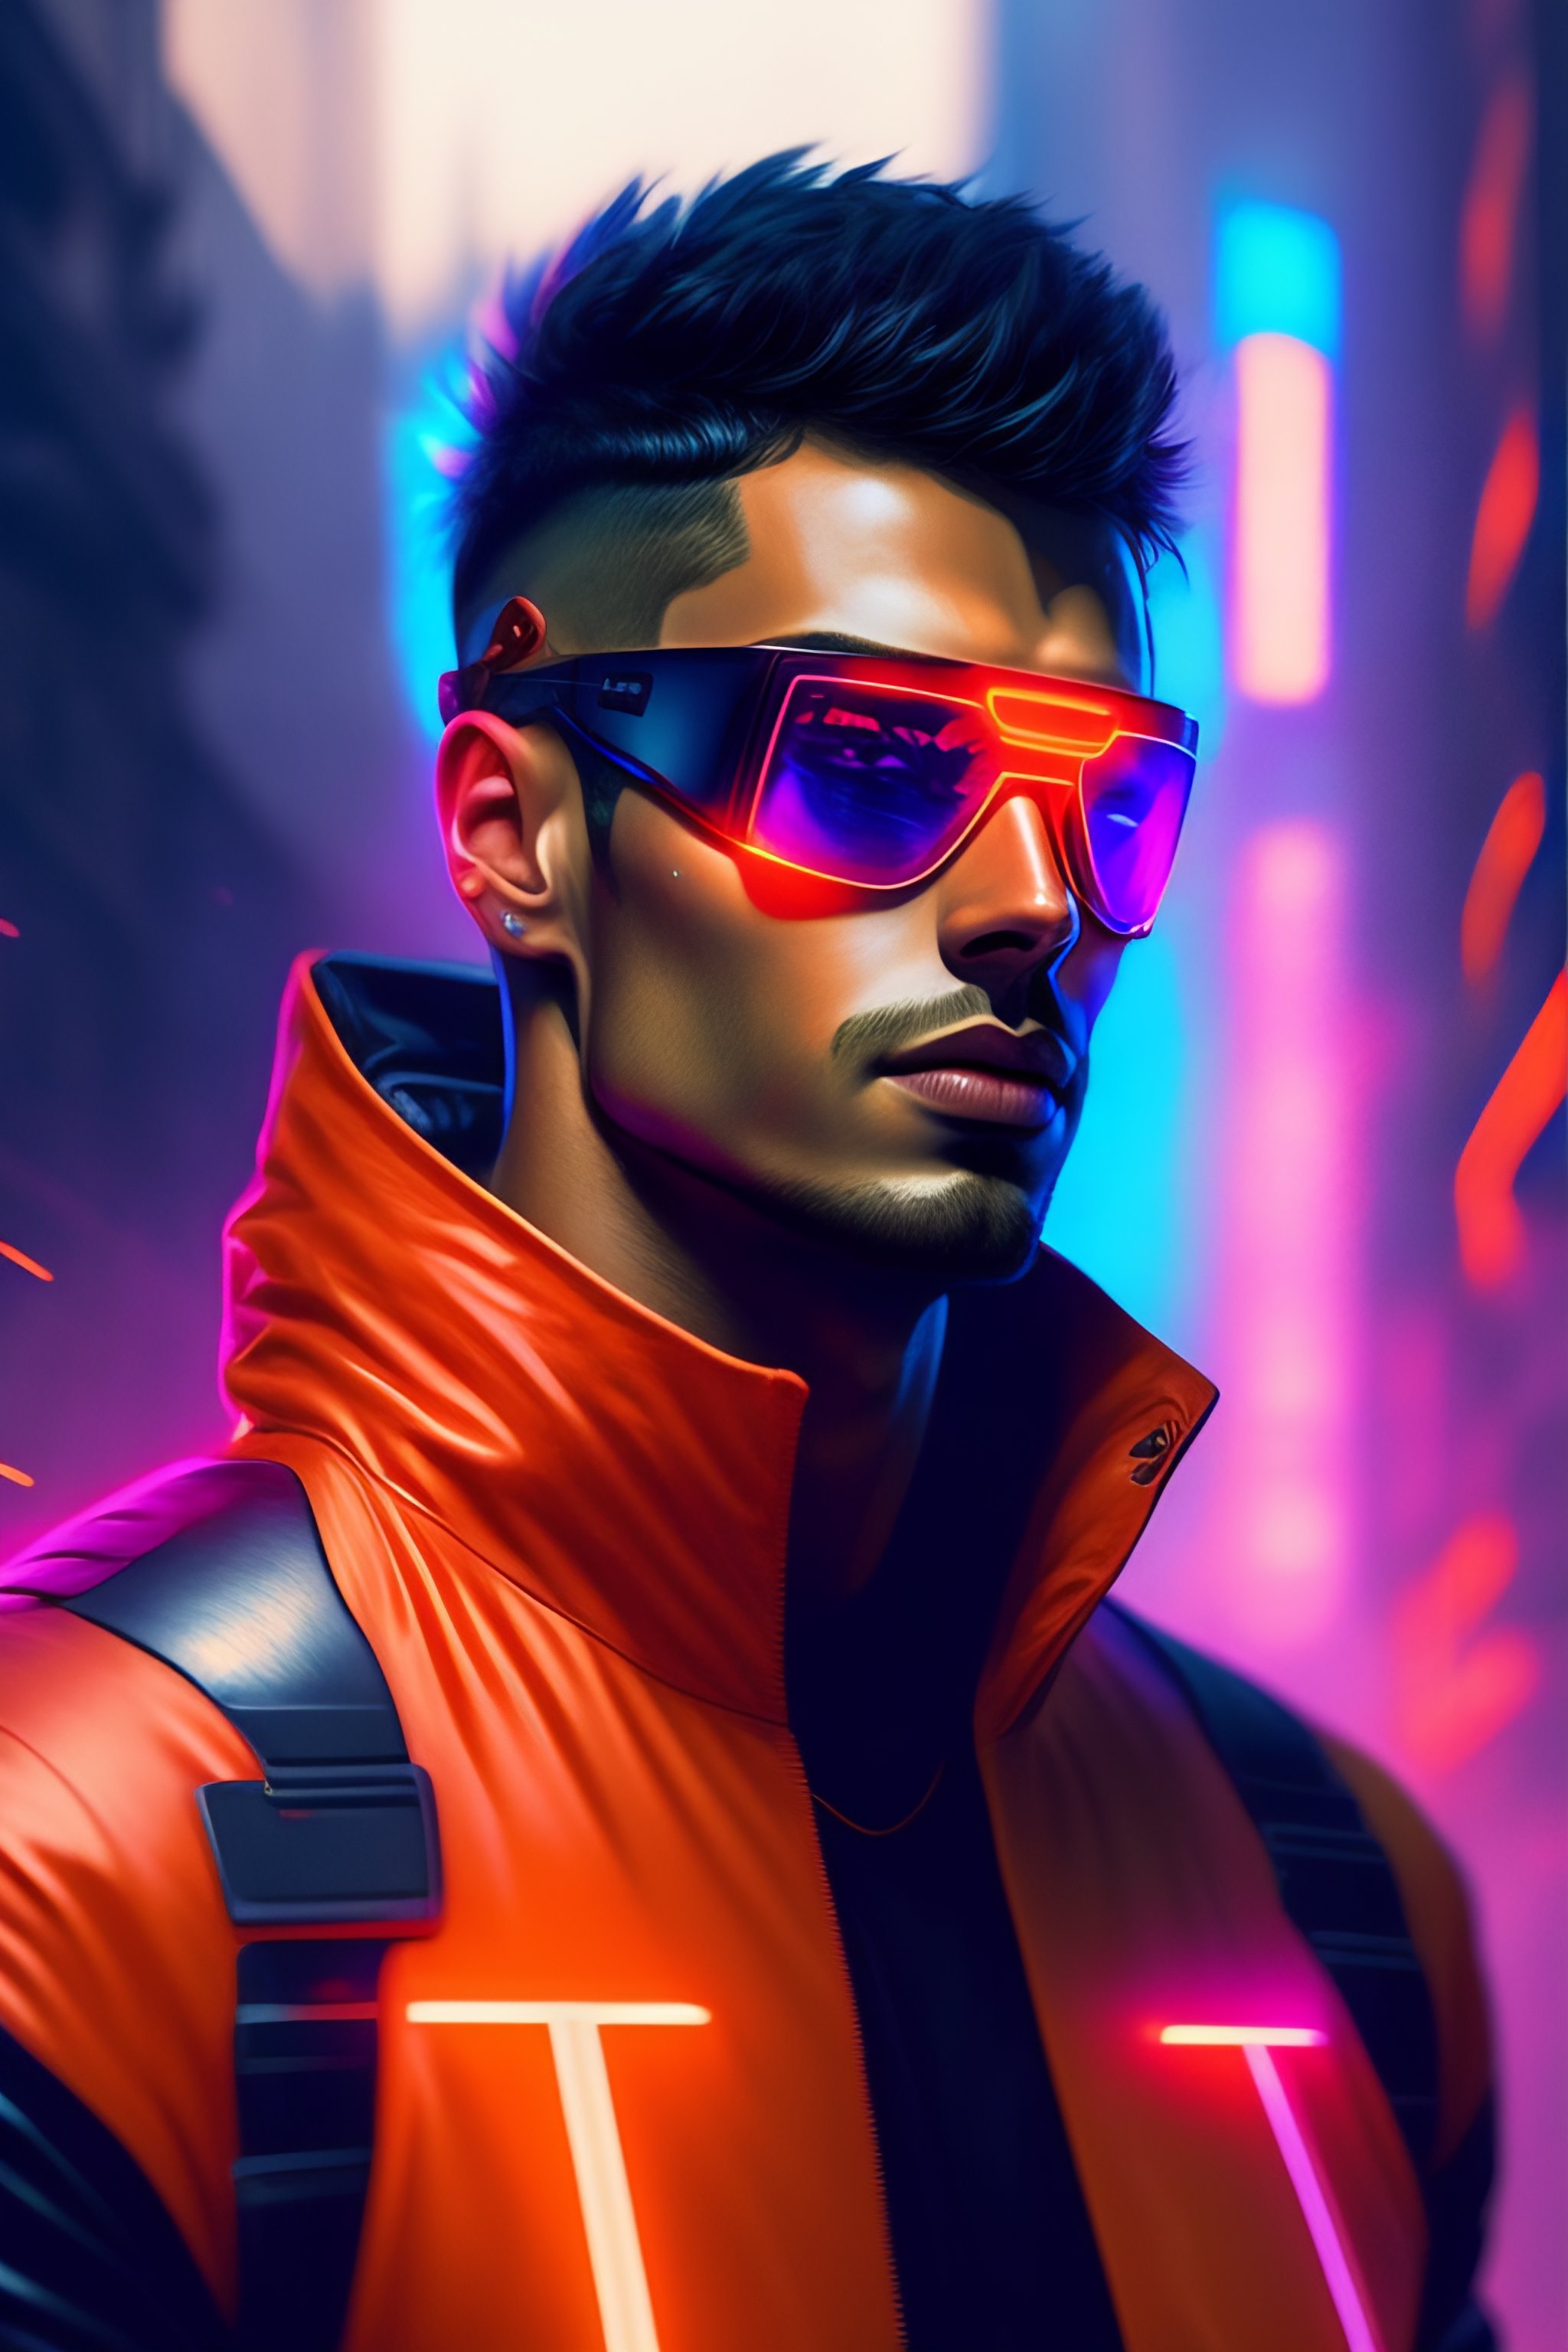 Lexica - Theo james as cyclops, cyberpunk futuristic neon. by ismail ...